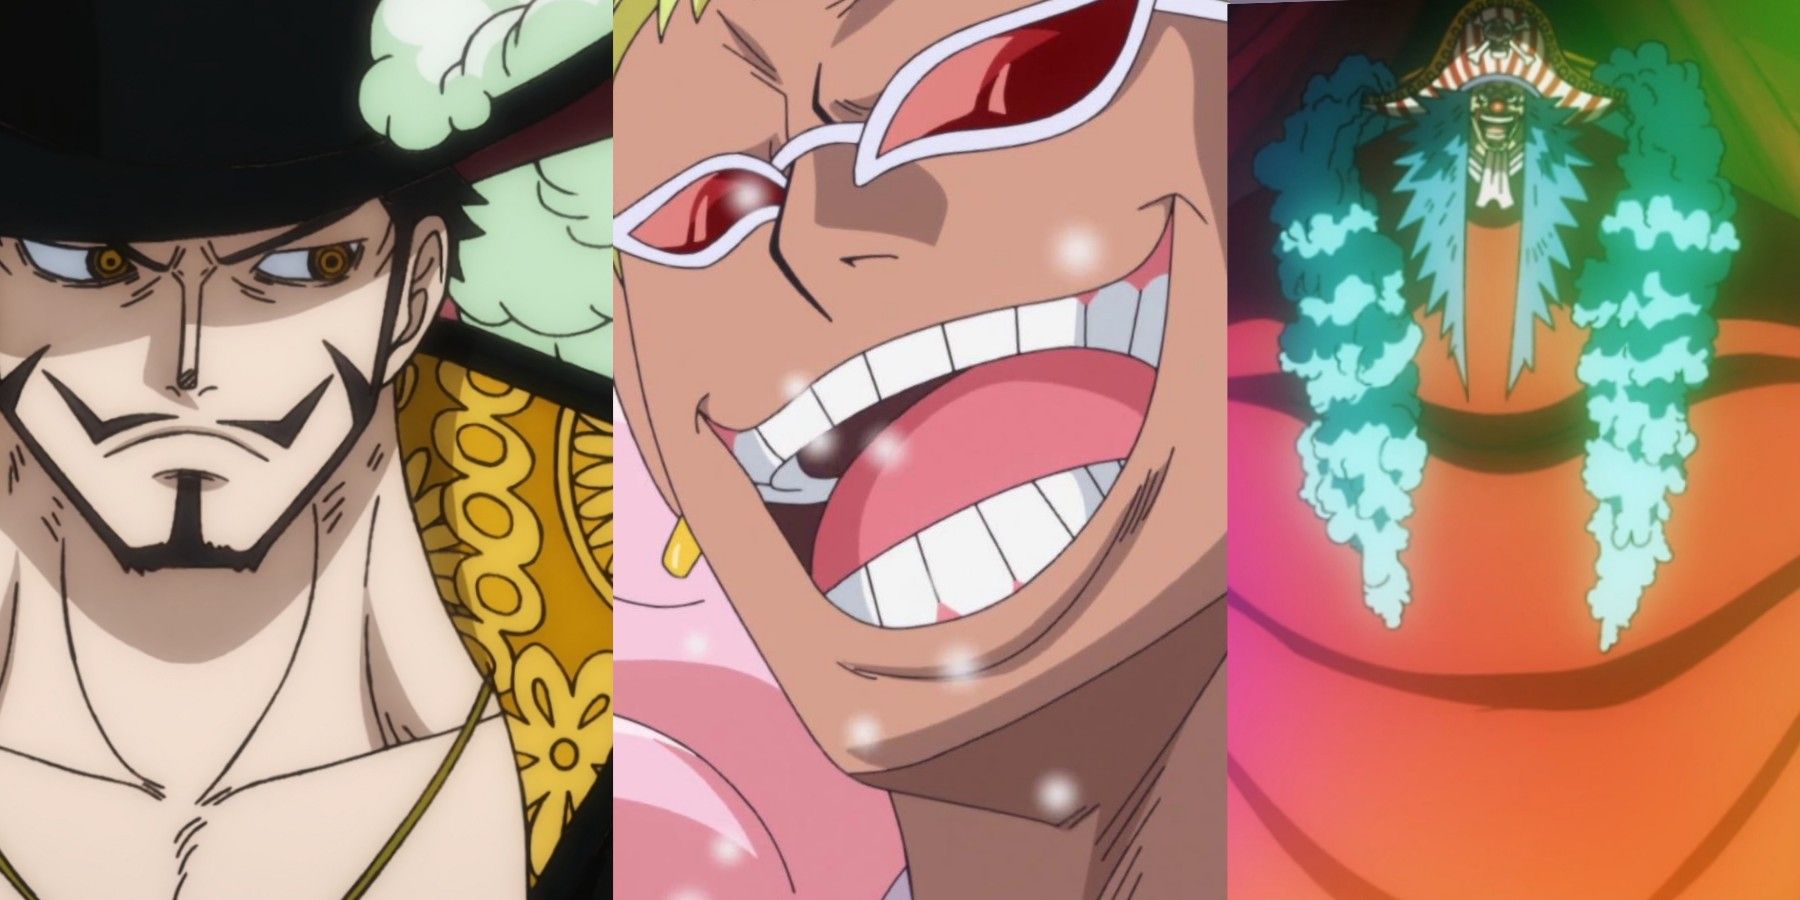 featured one piece will Doflamingo join the cross guild mihawk buggy